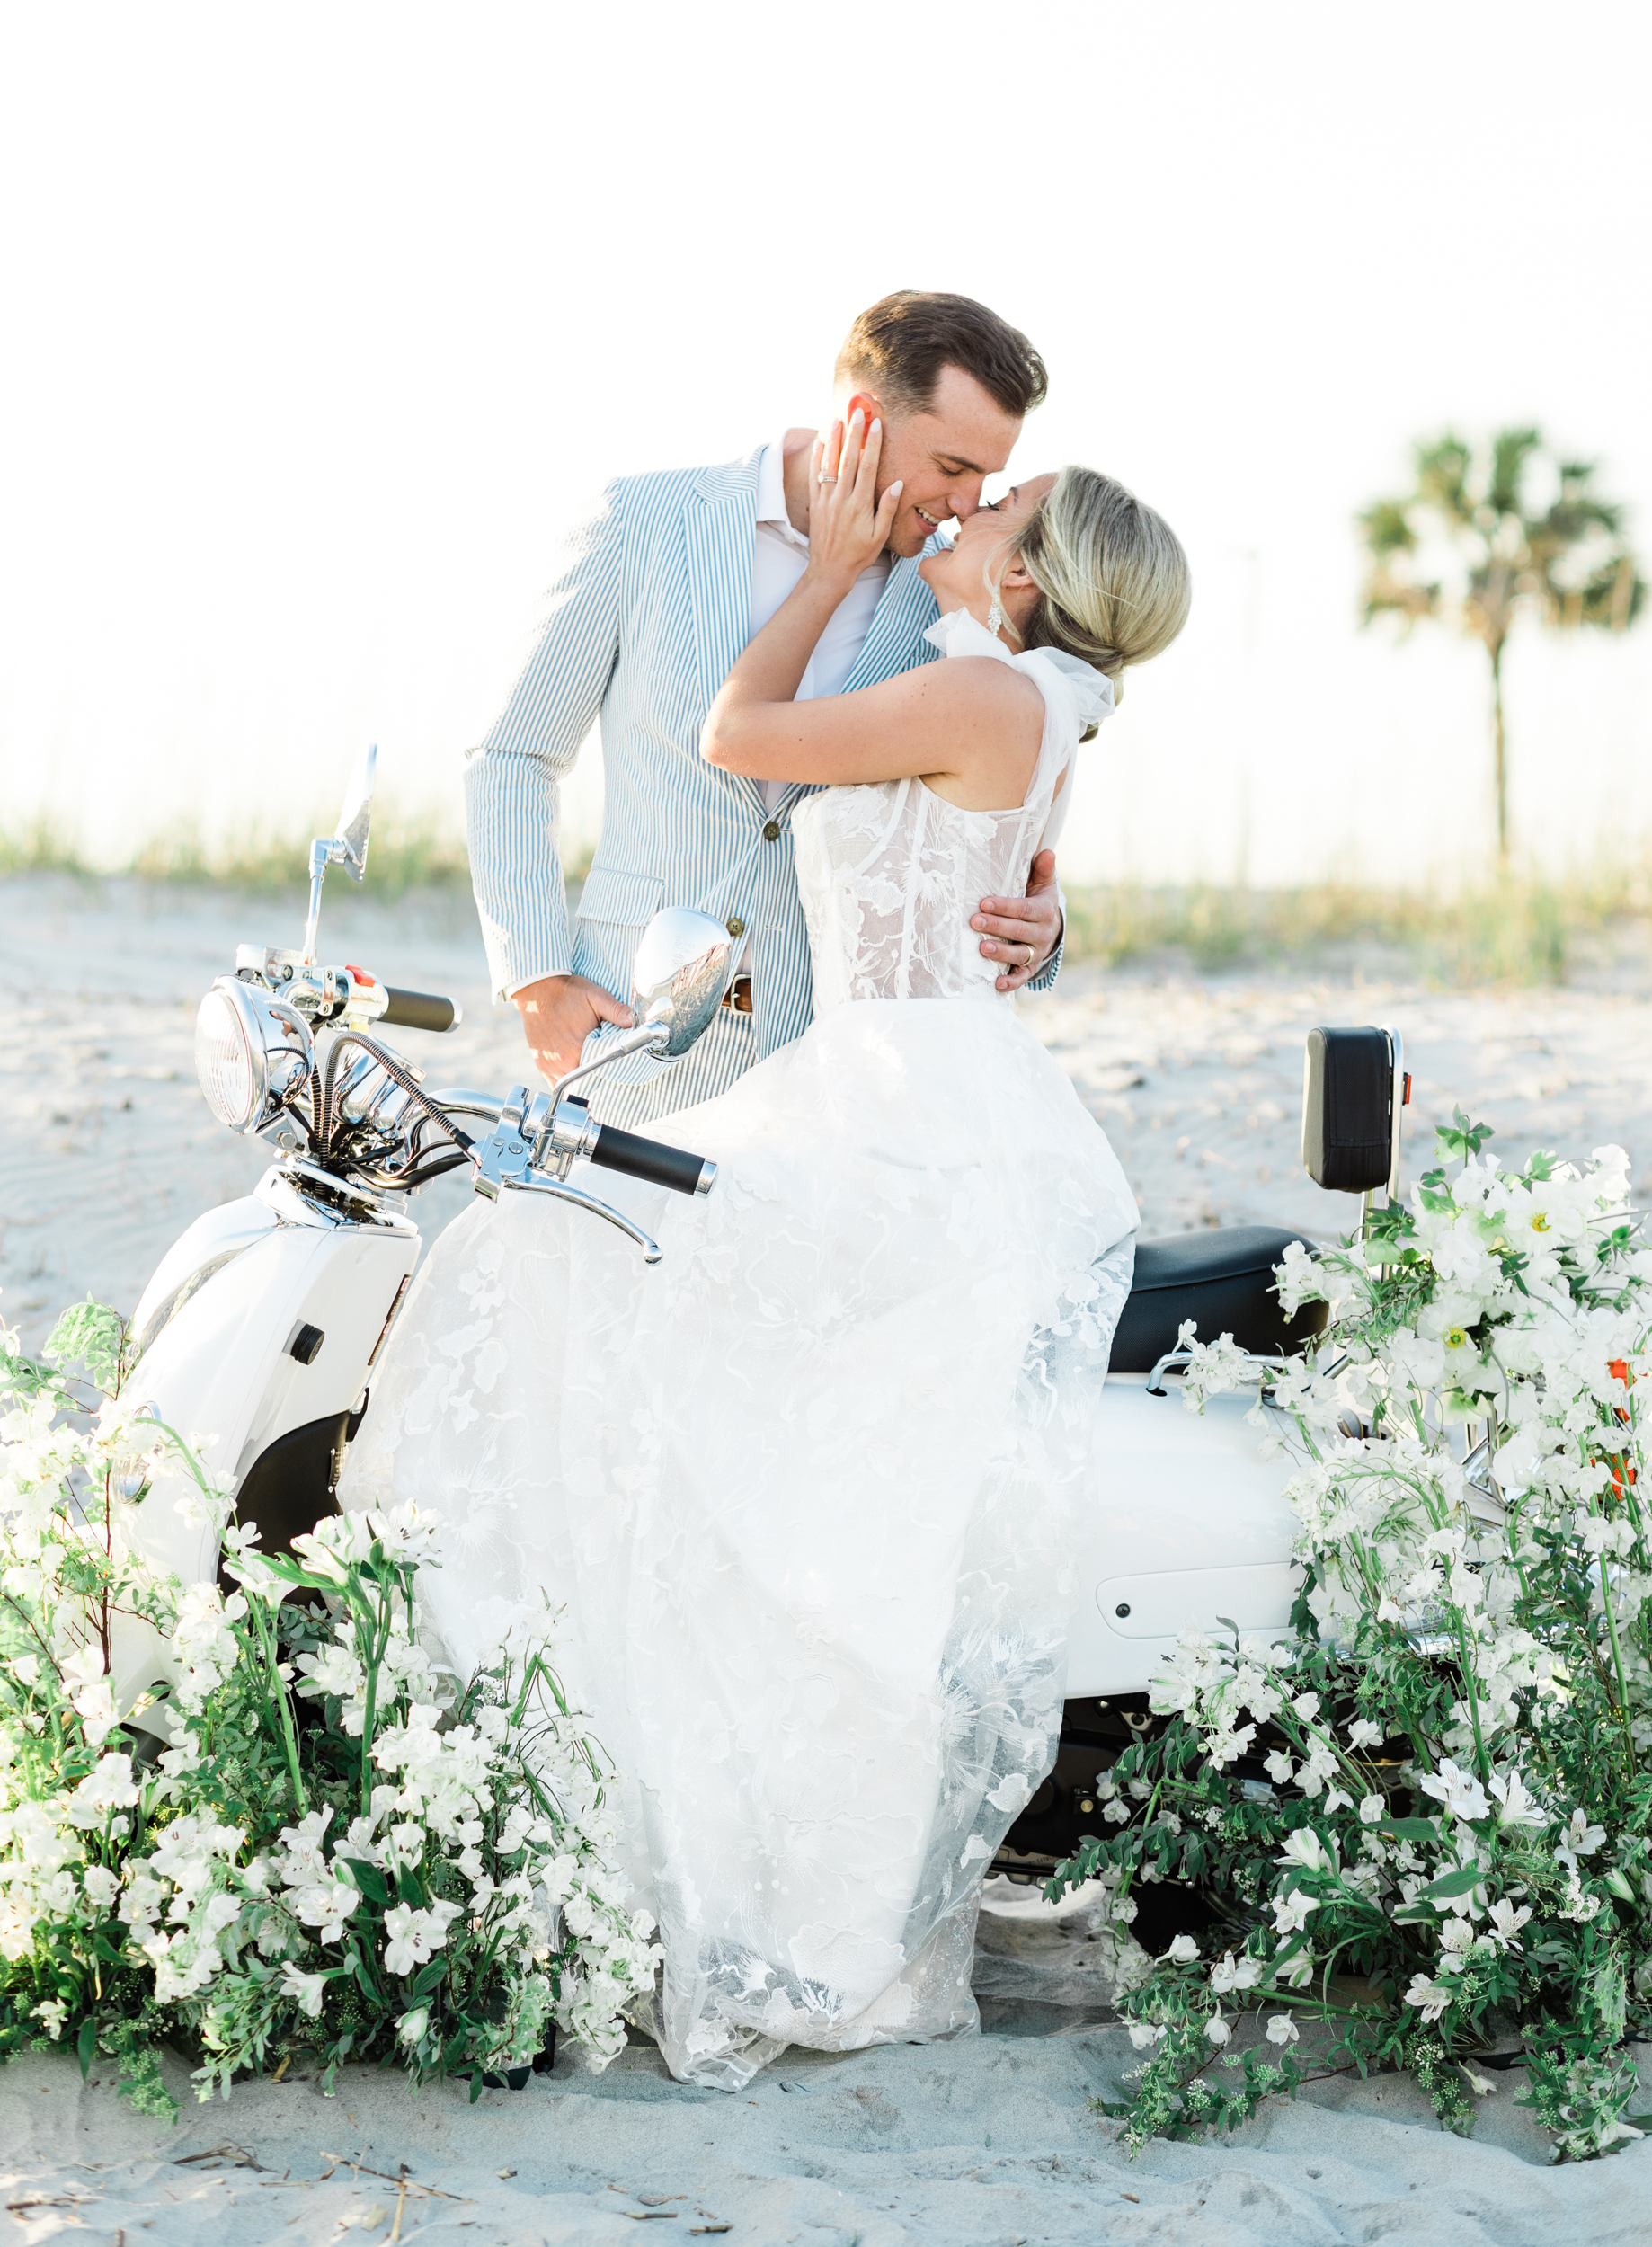 Folly Beach Elopement Bride and Groom on Vespa